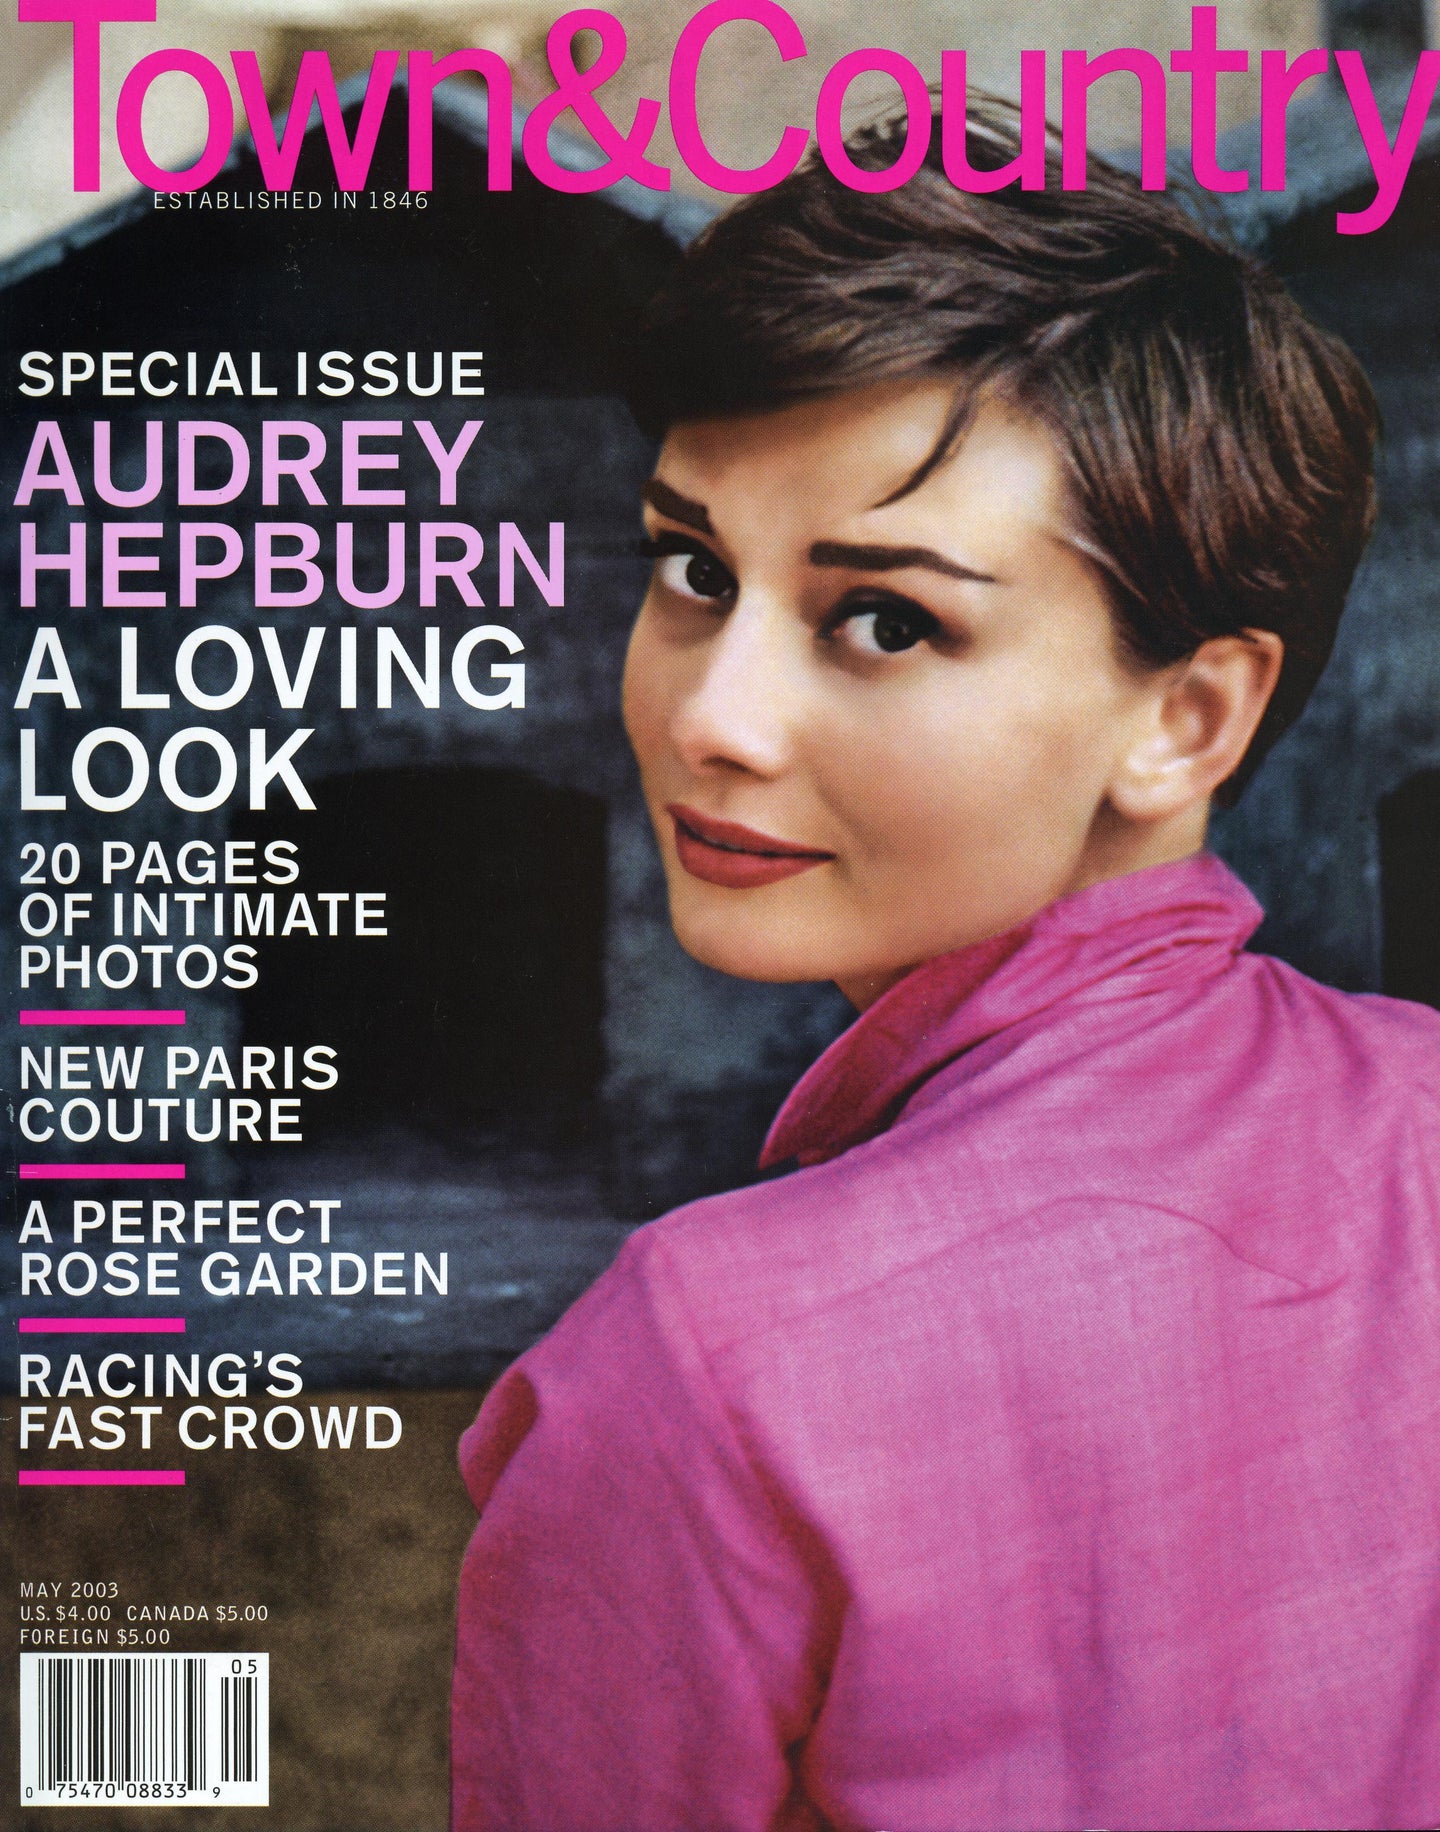 Audrey Hepburn on cover of Town & Country Magazine May 2003